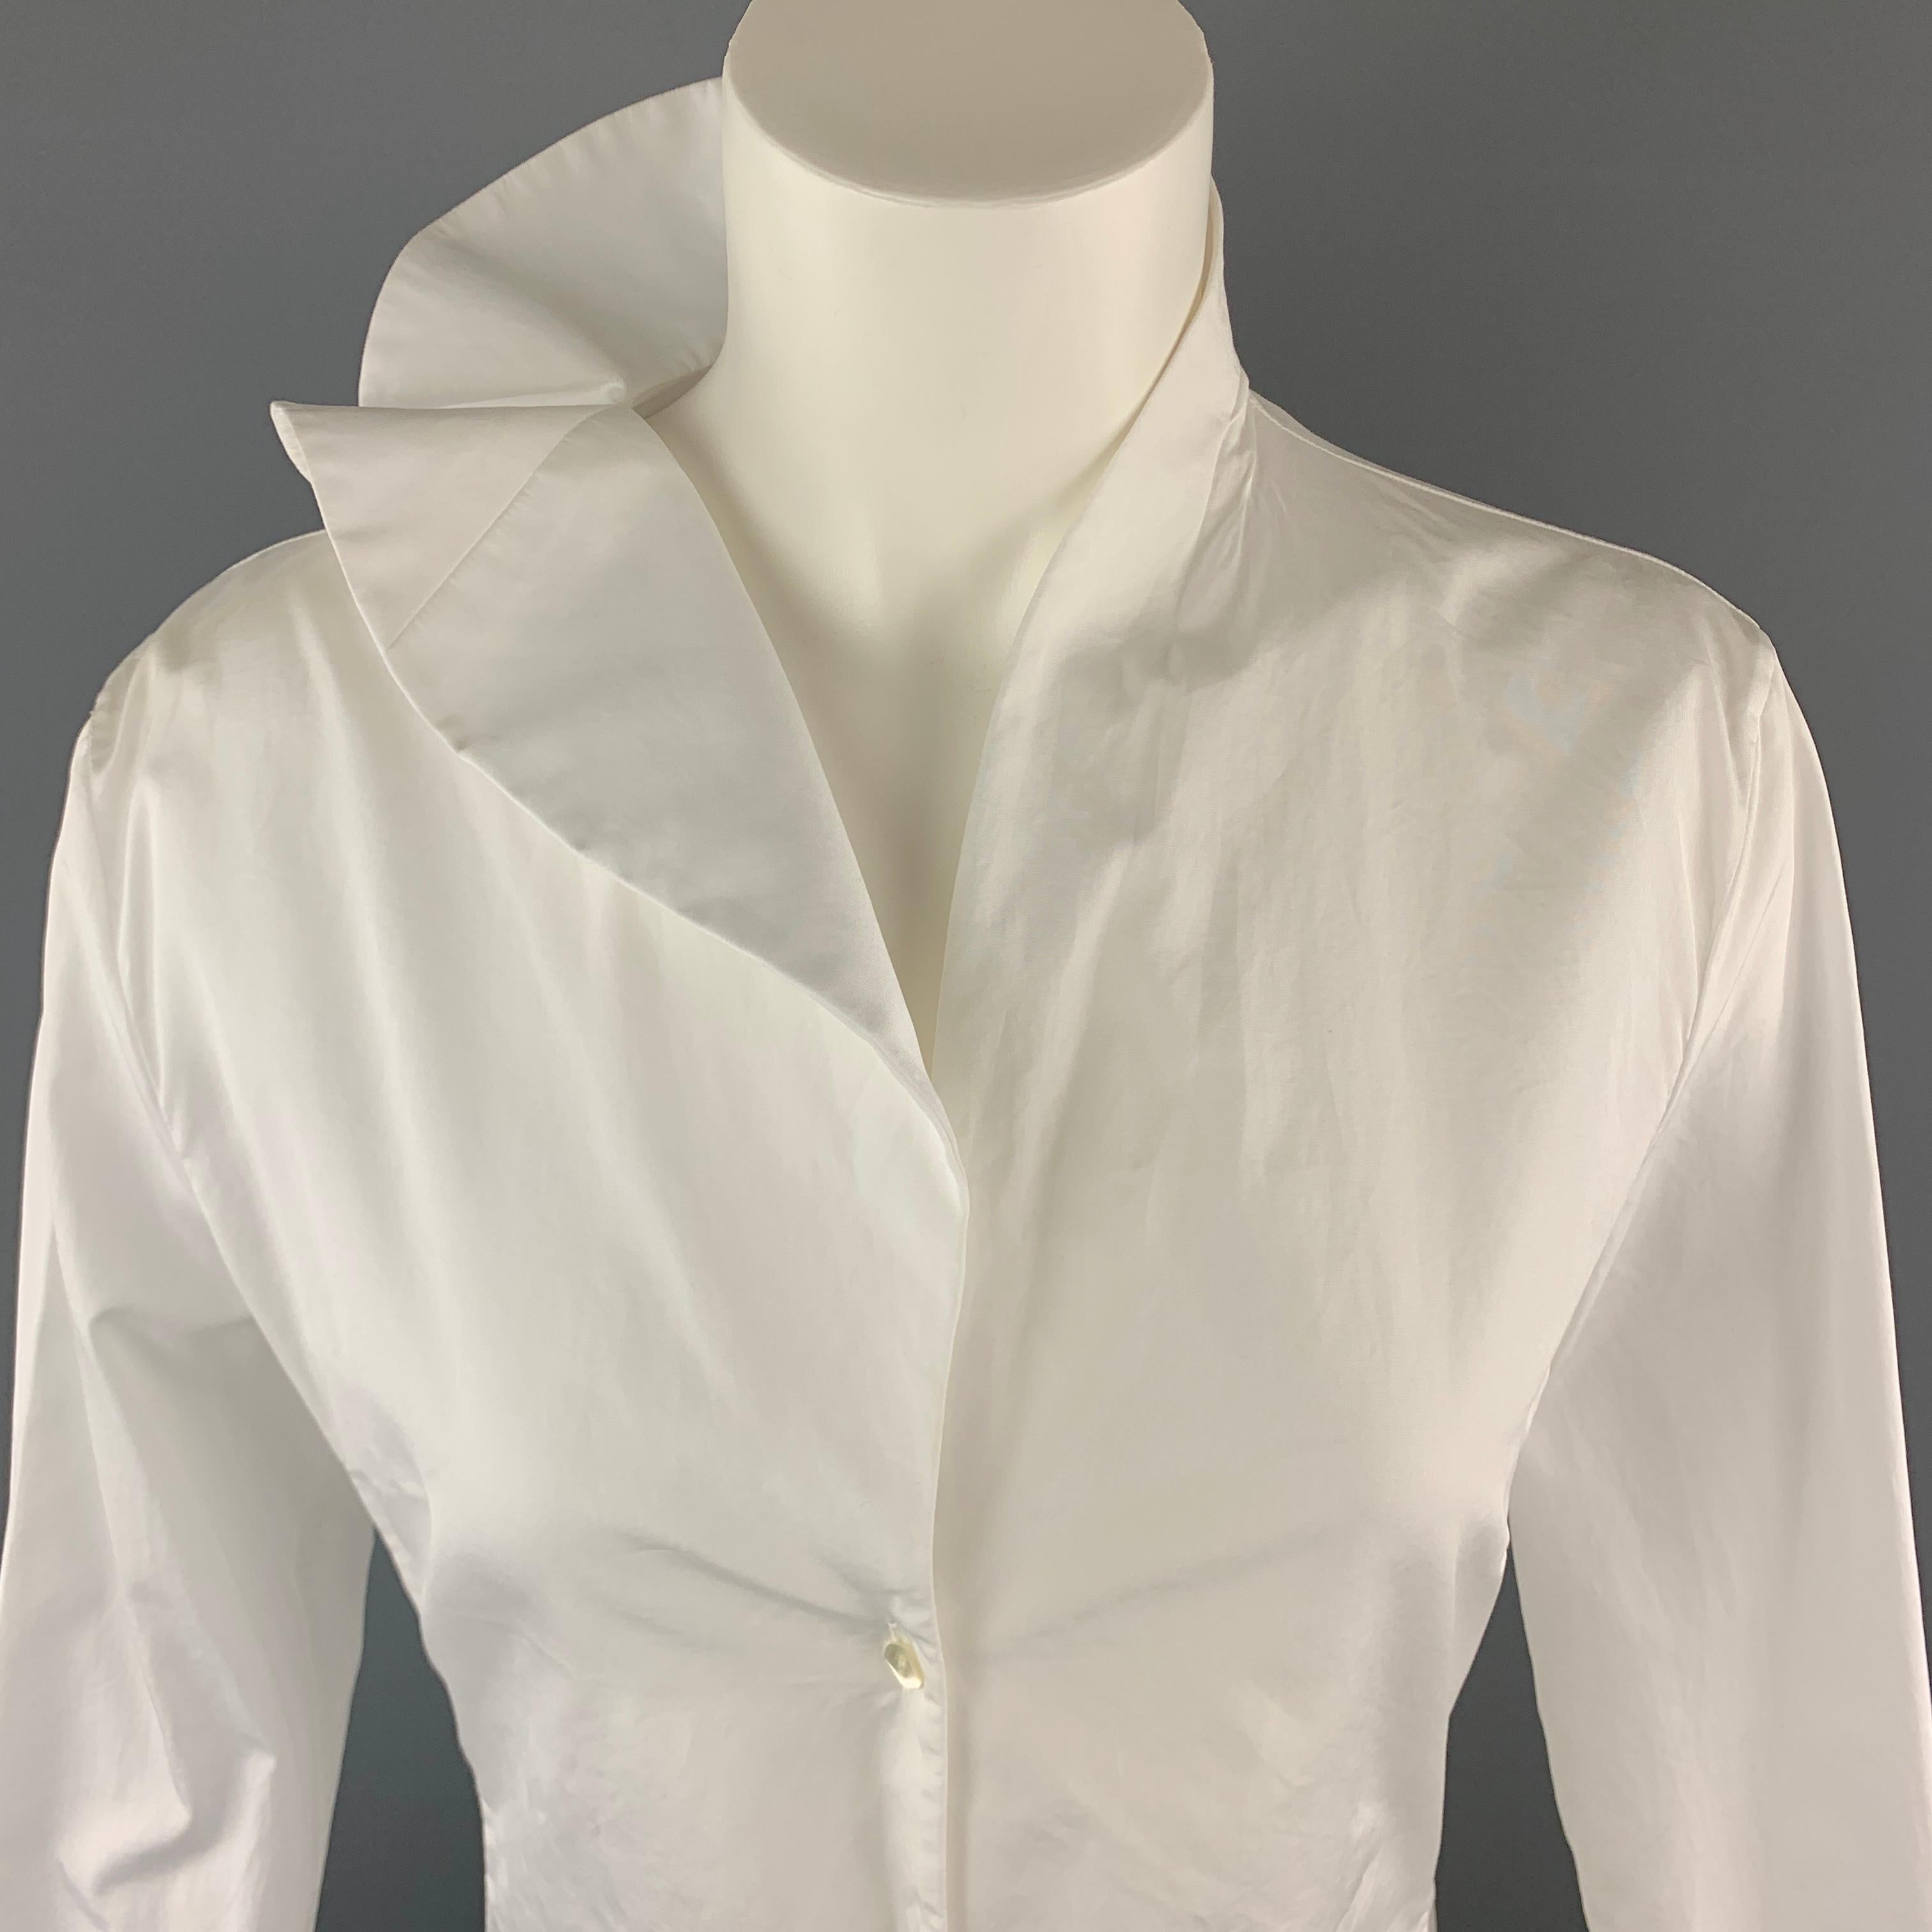 JIL SANDER Blouse comes in a white tone in a solid cotton material, with a ruffled asymmetrical collar, five buttons at closure, long sleeves, and buttoned cuffs. Wear at right cuff. Made in Italy.

Very Good Pre-Owned Condition.
Marked: IT